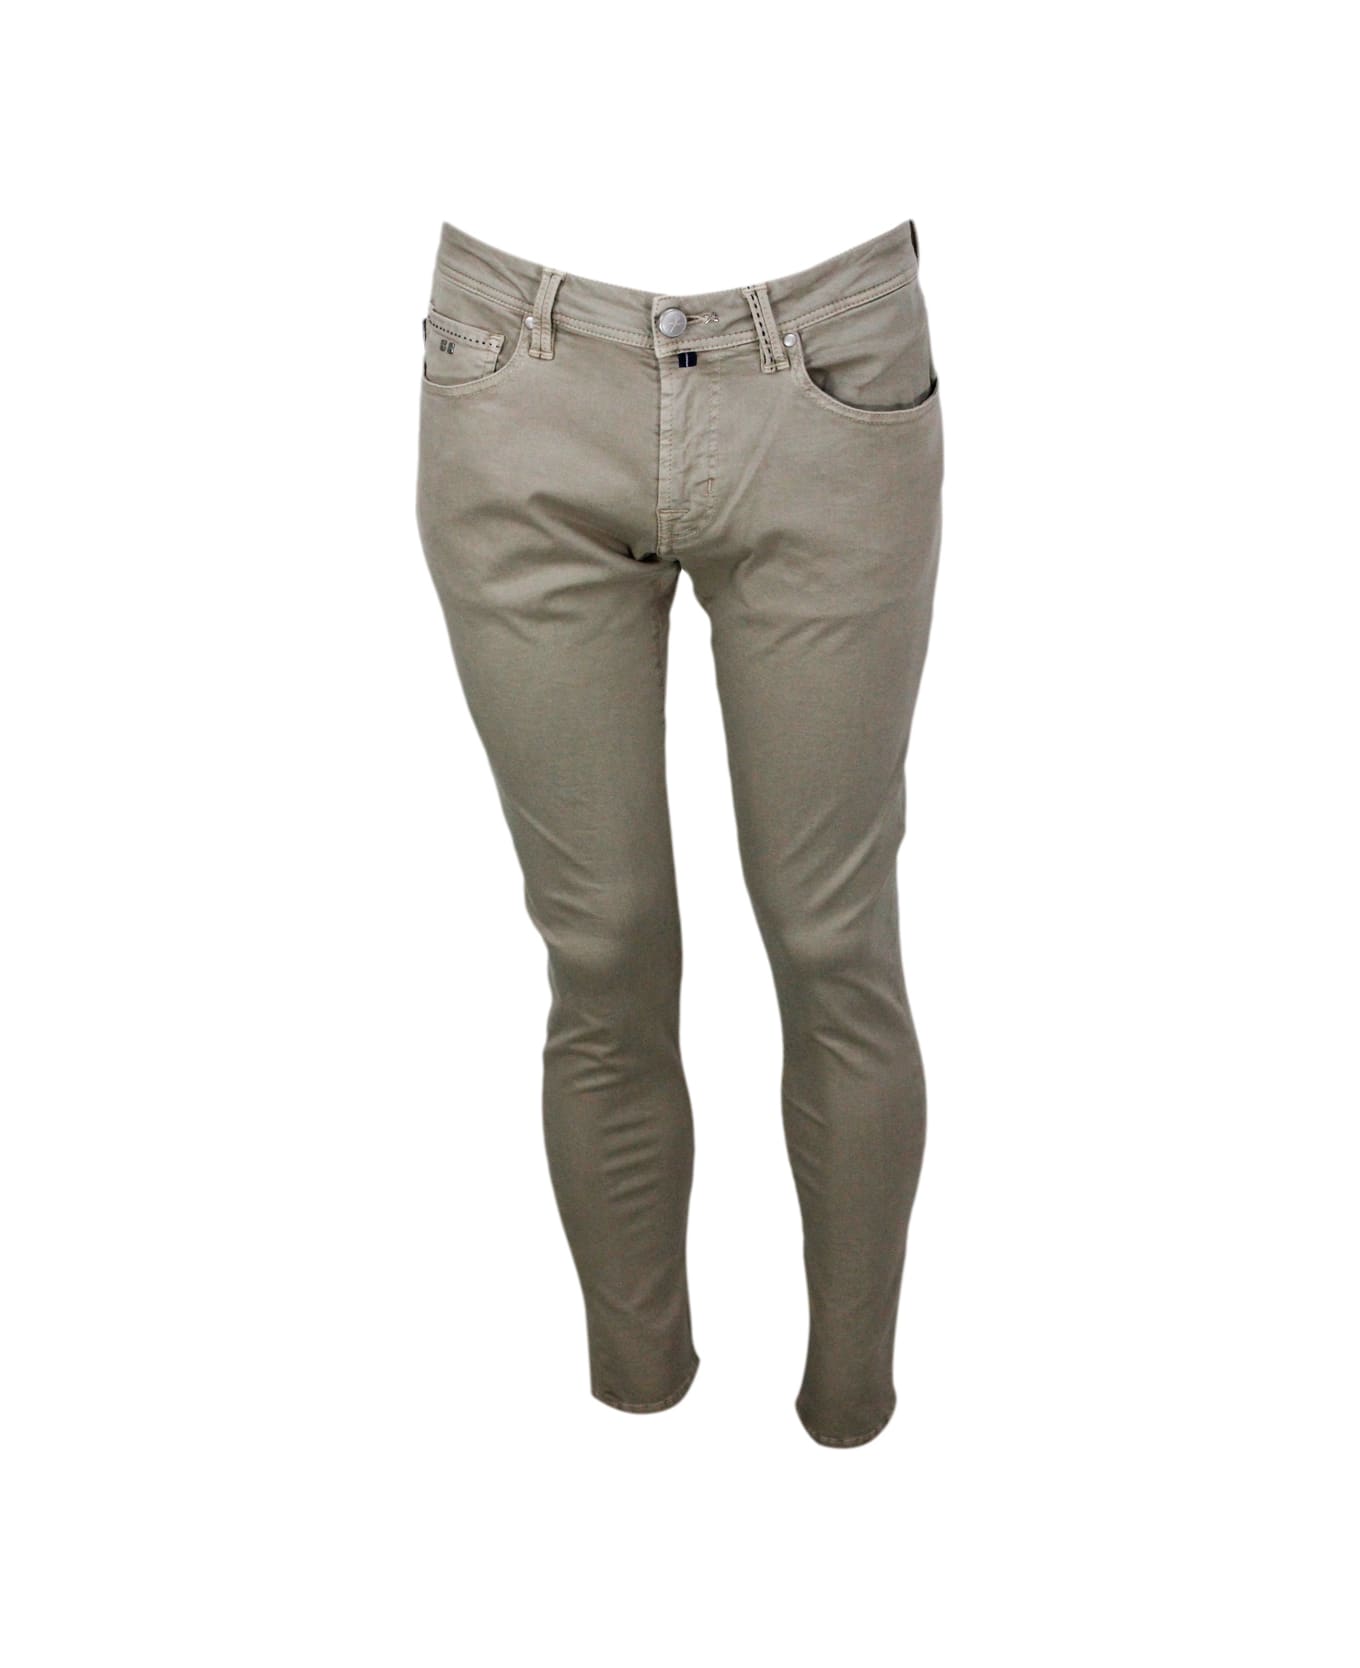 Sartoria Tramarossa Leonardo Slim Zip Trousers In Soft Cotton With 5 Pockets With Tailored Stitching And Suede Tab. Zip And Button Closure - Sand Beige